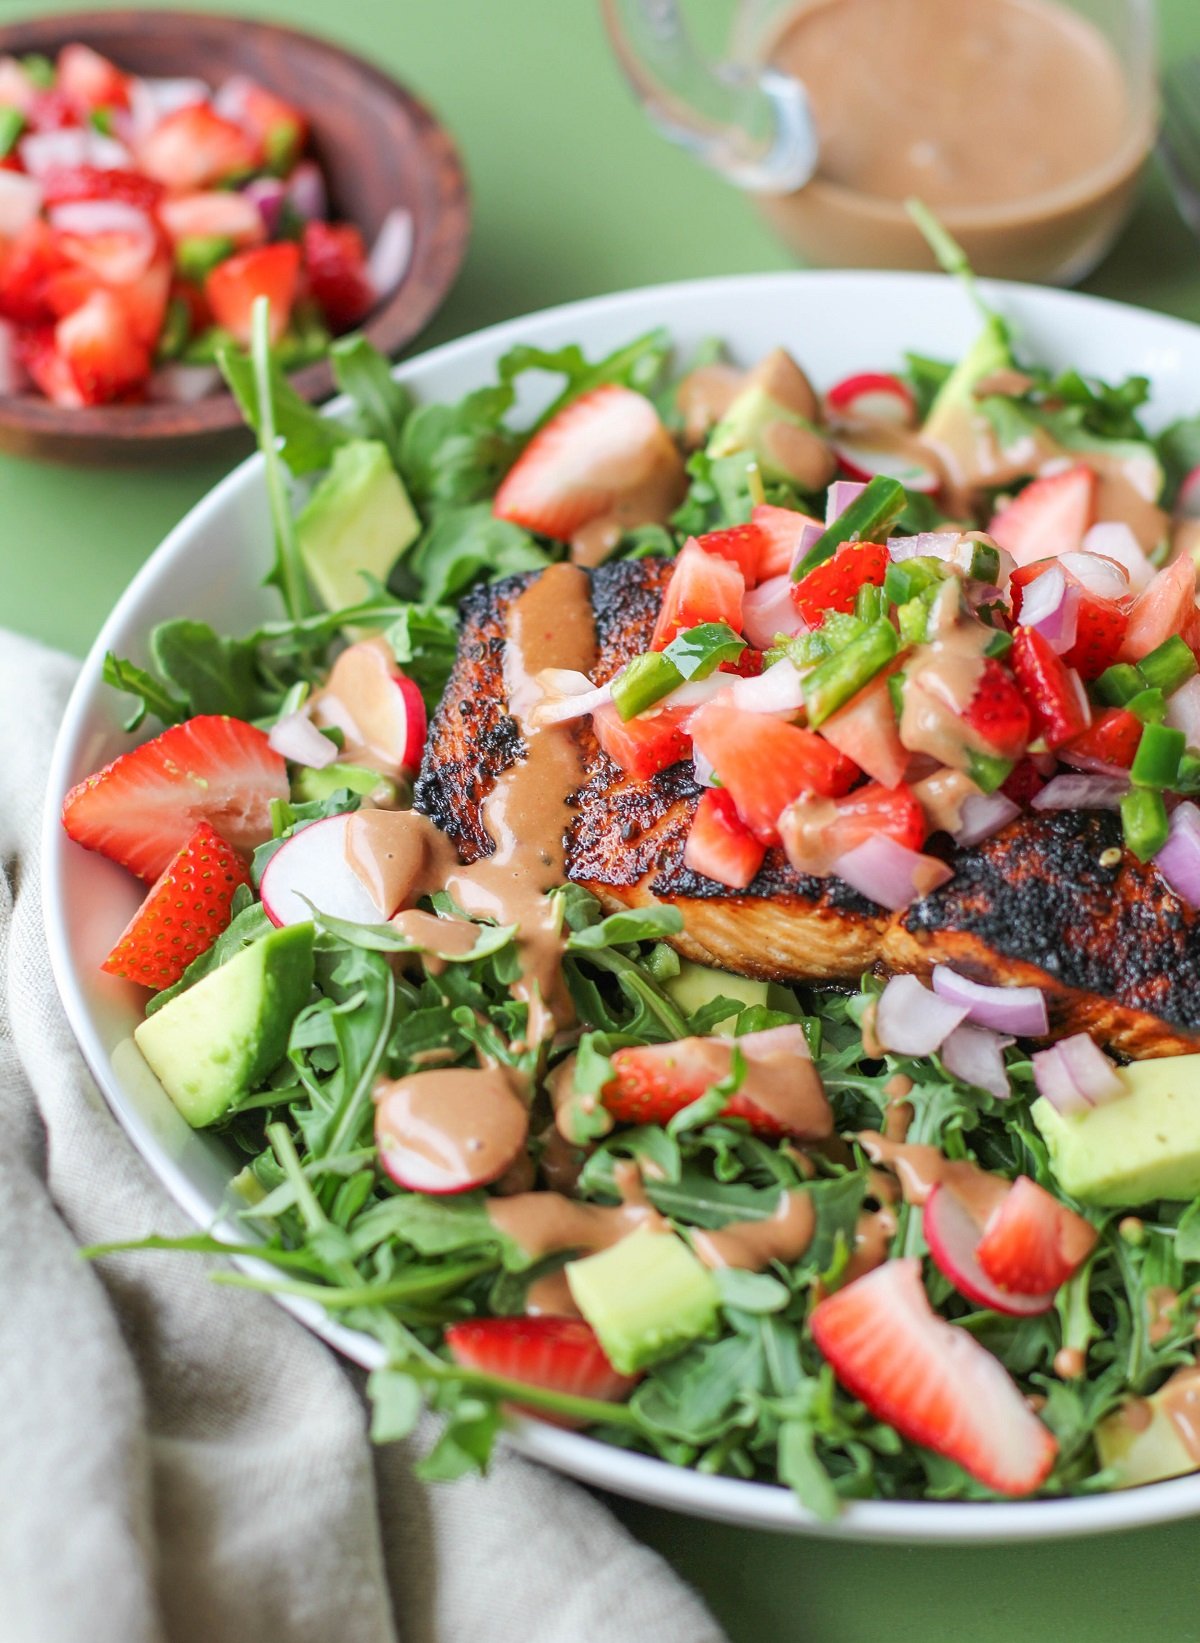 Grilled salmon in a bowl with salad ingredients, strawberry salsa and avocado on a green background.